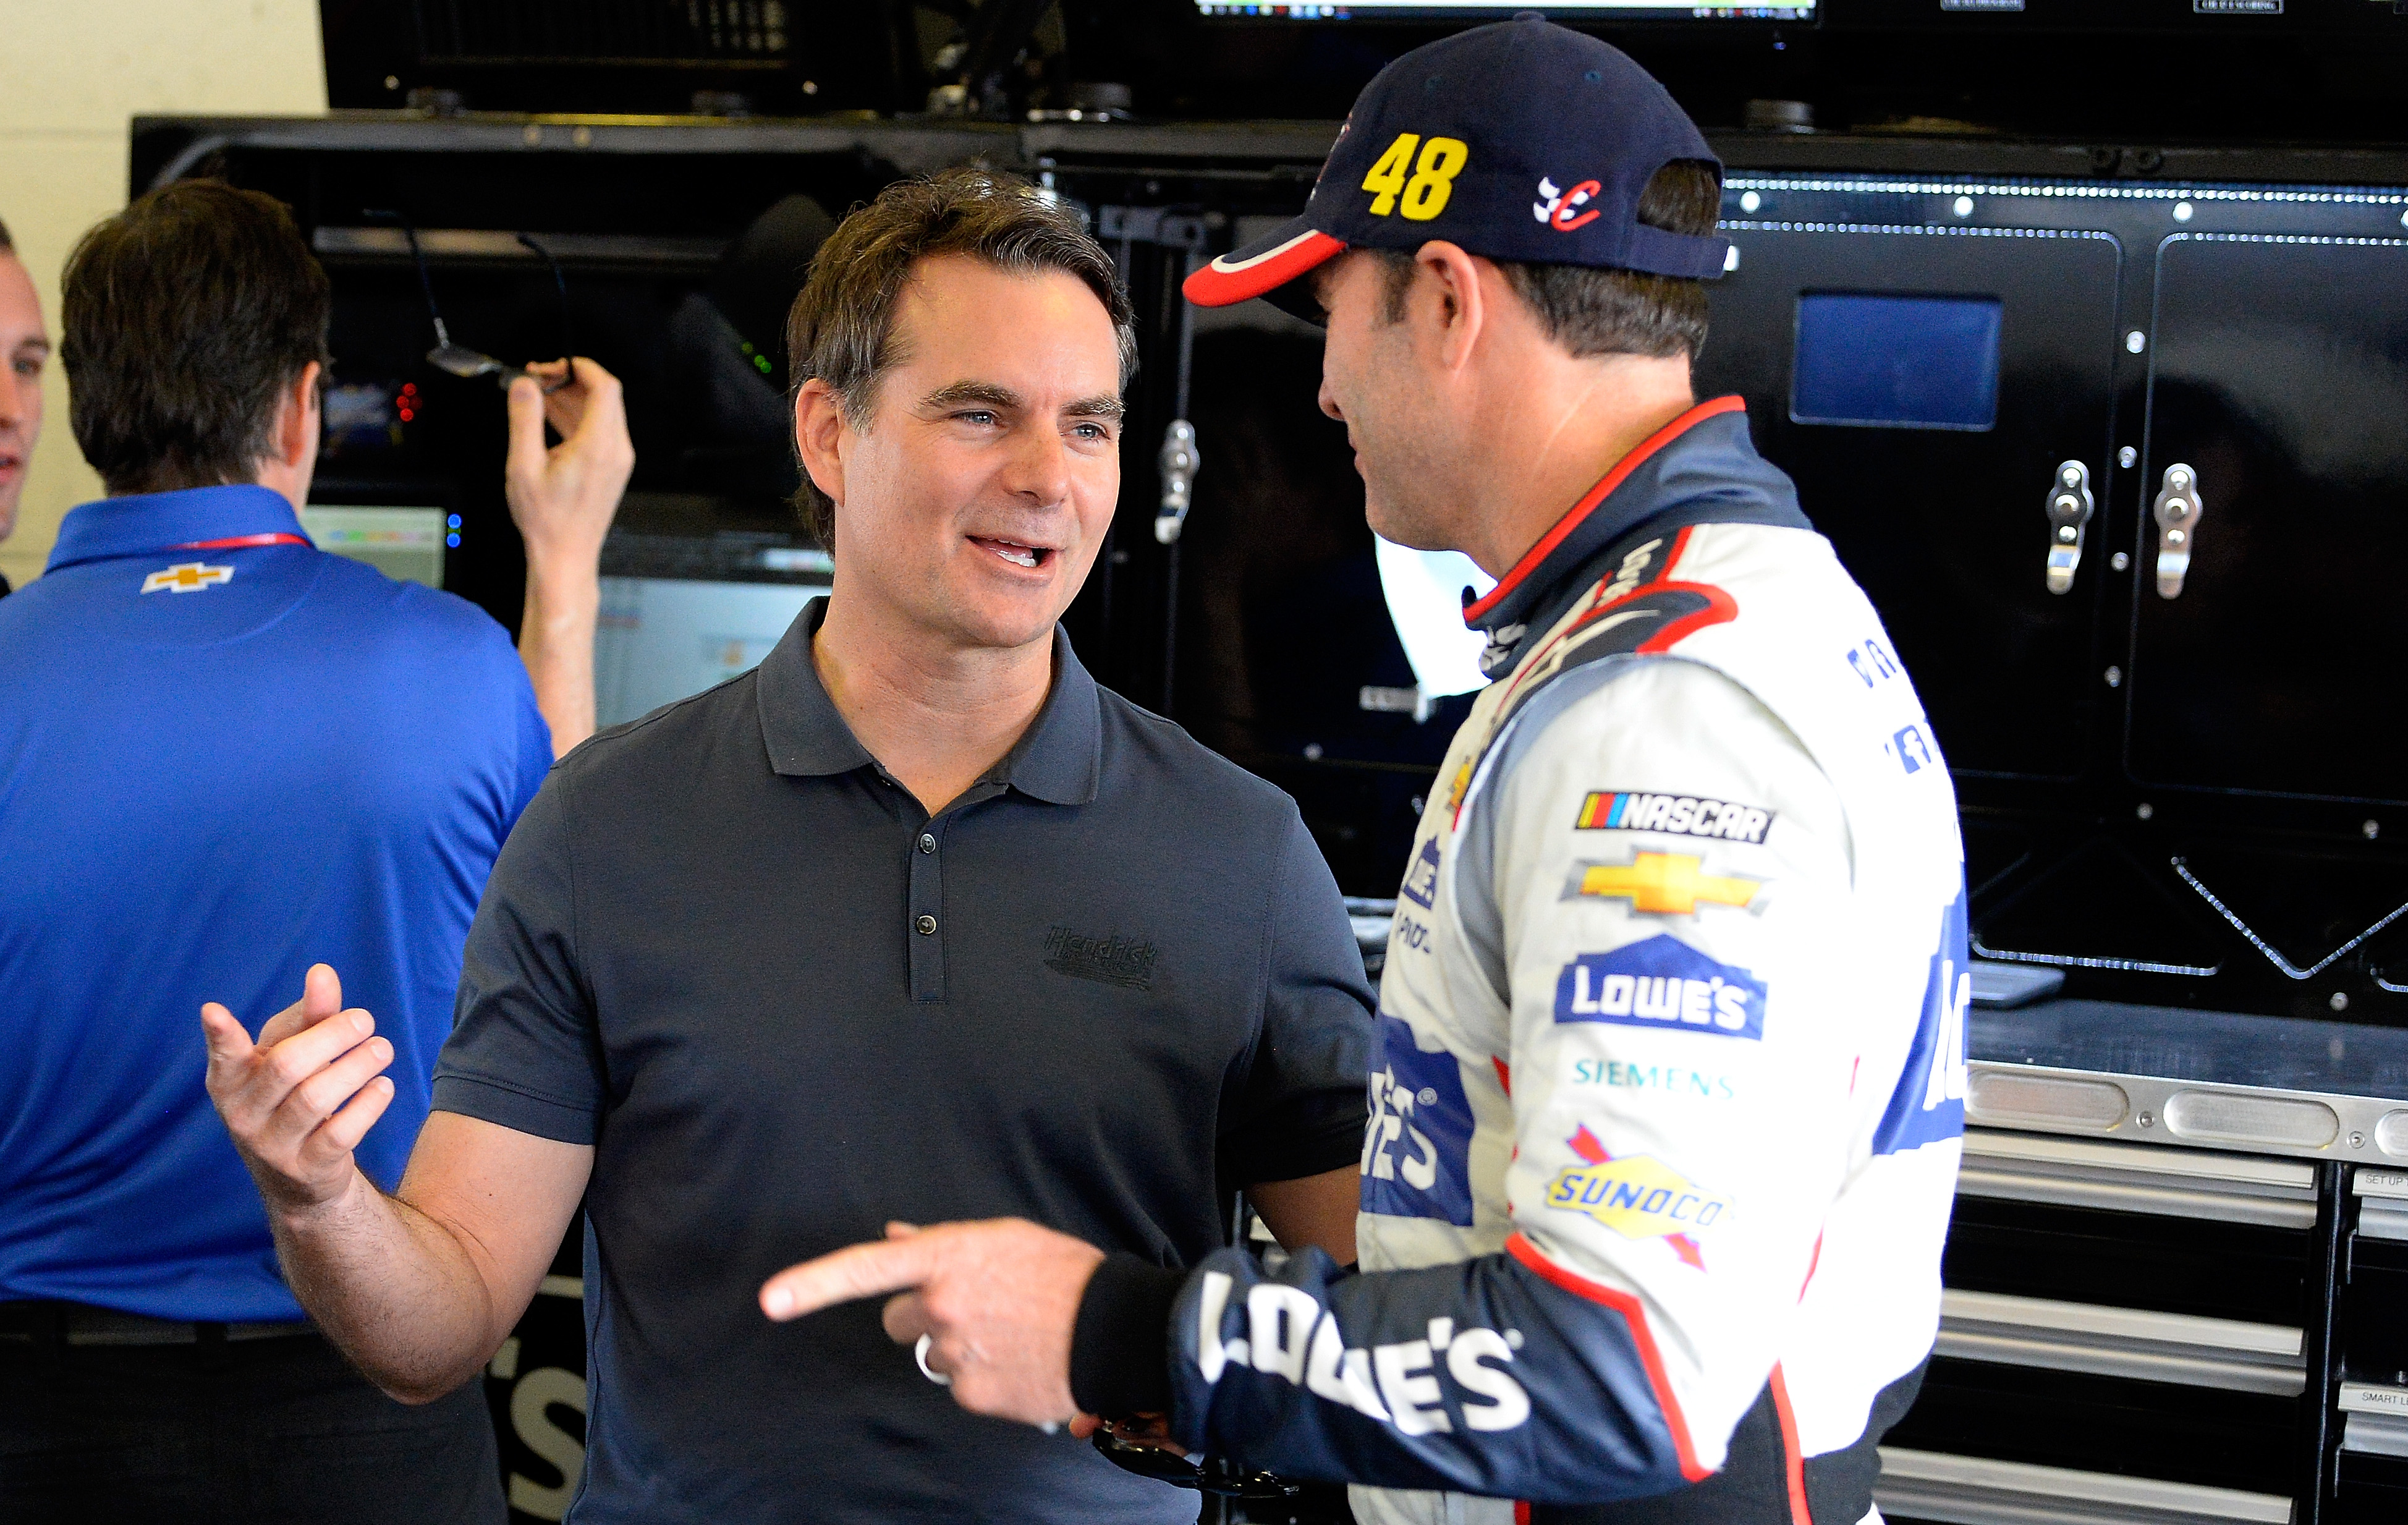 Jeff Gordon Spent Nearly $10 Million Attempting to Maintain Total Privacy at the Height of His NASCAR Career